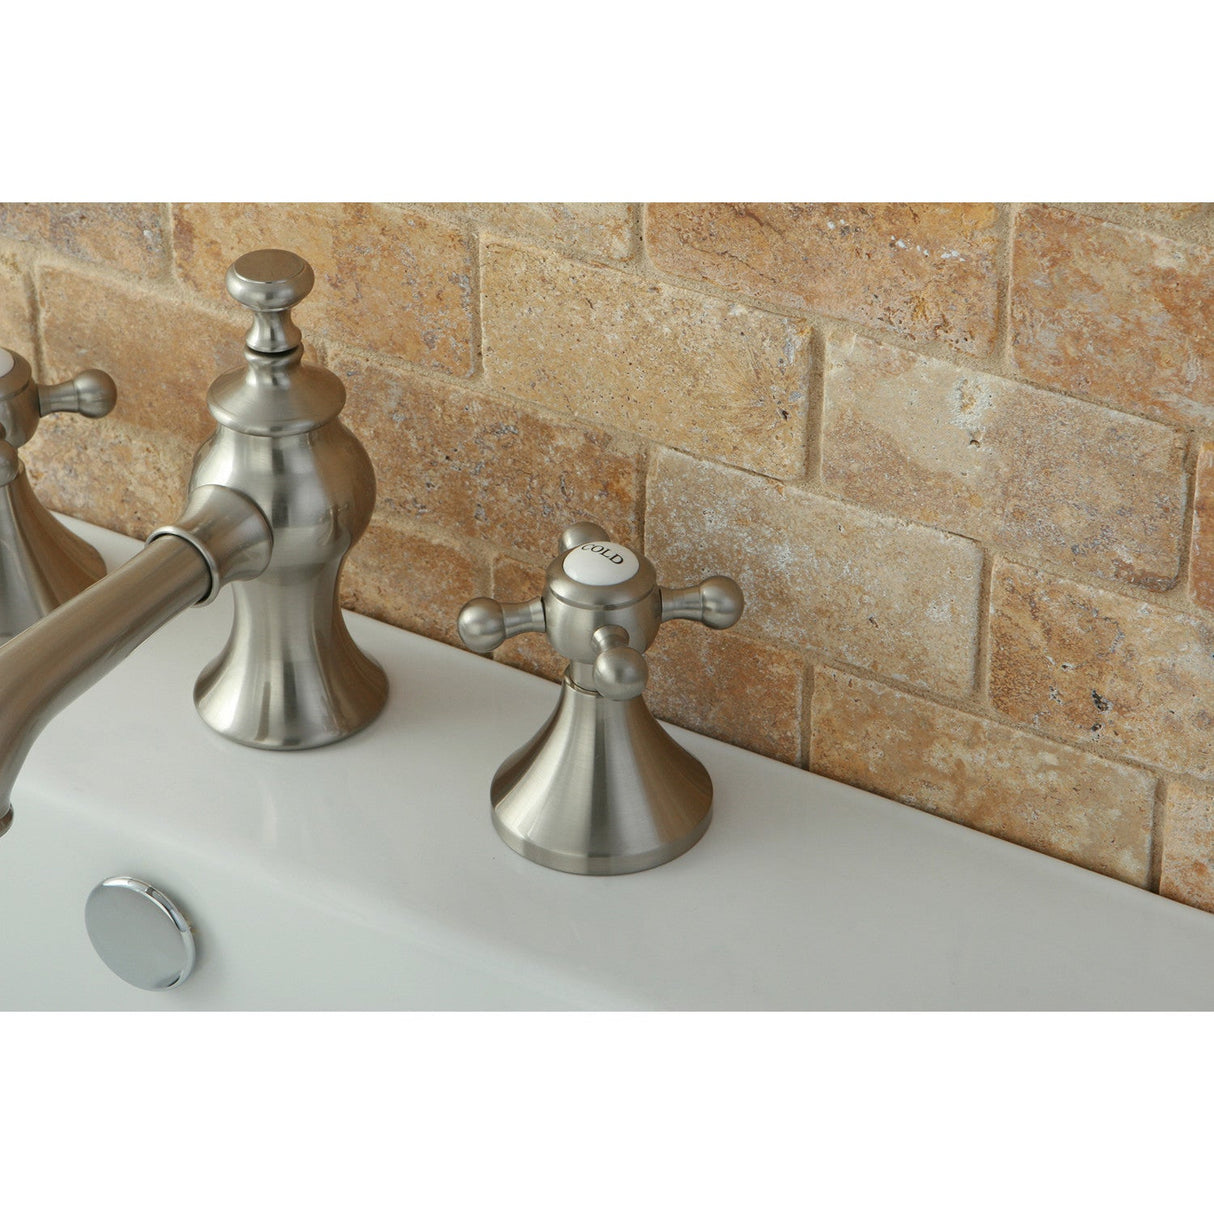 English Country KC7068BX Two-Handle 3-Hole Deck Mount Widespread Bathroom Faucet with Brass Pop-Up, Brushed Nickel